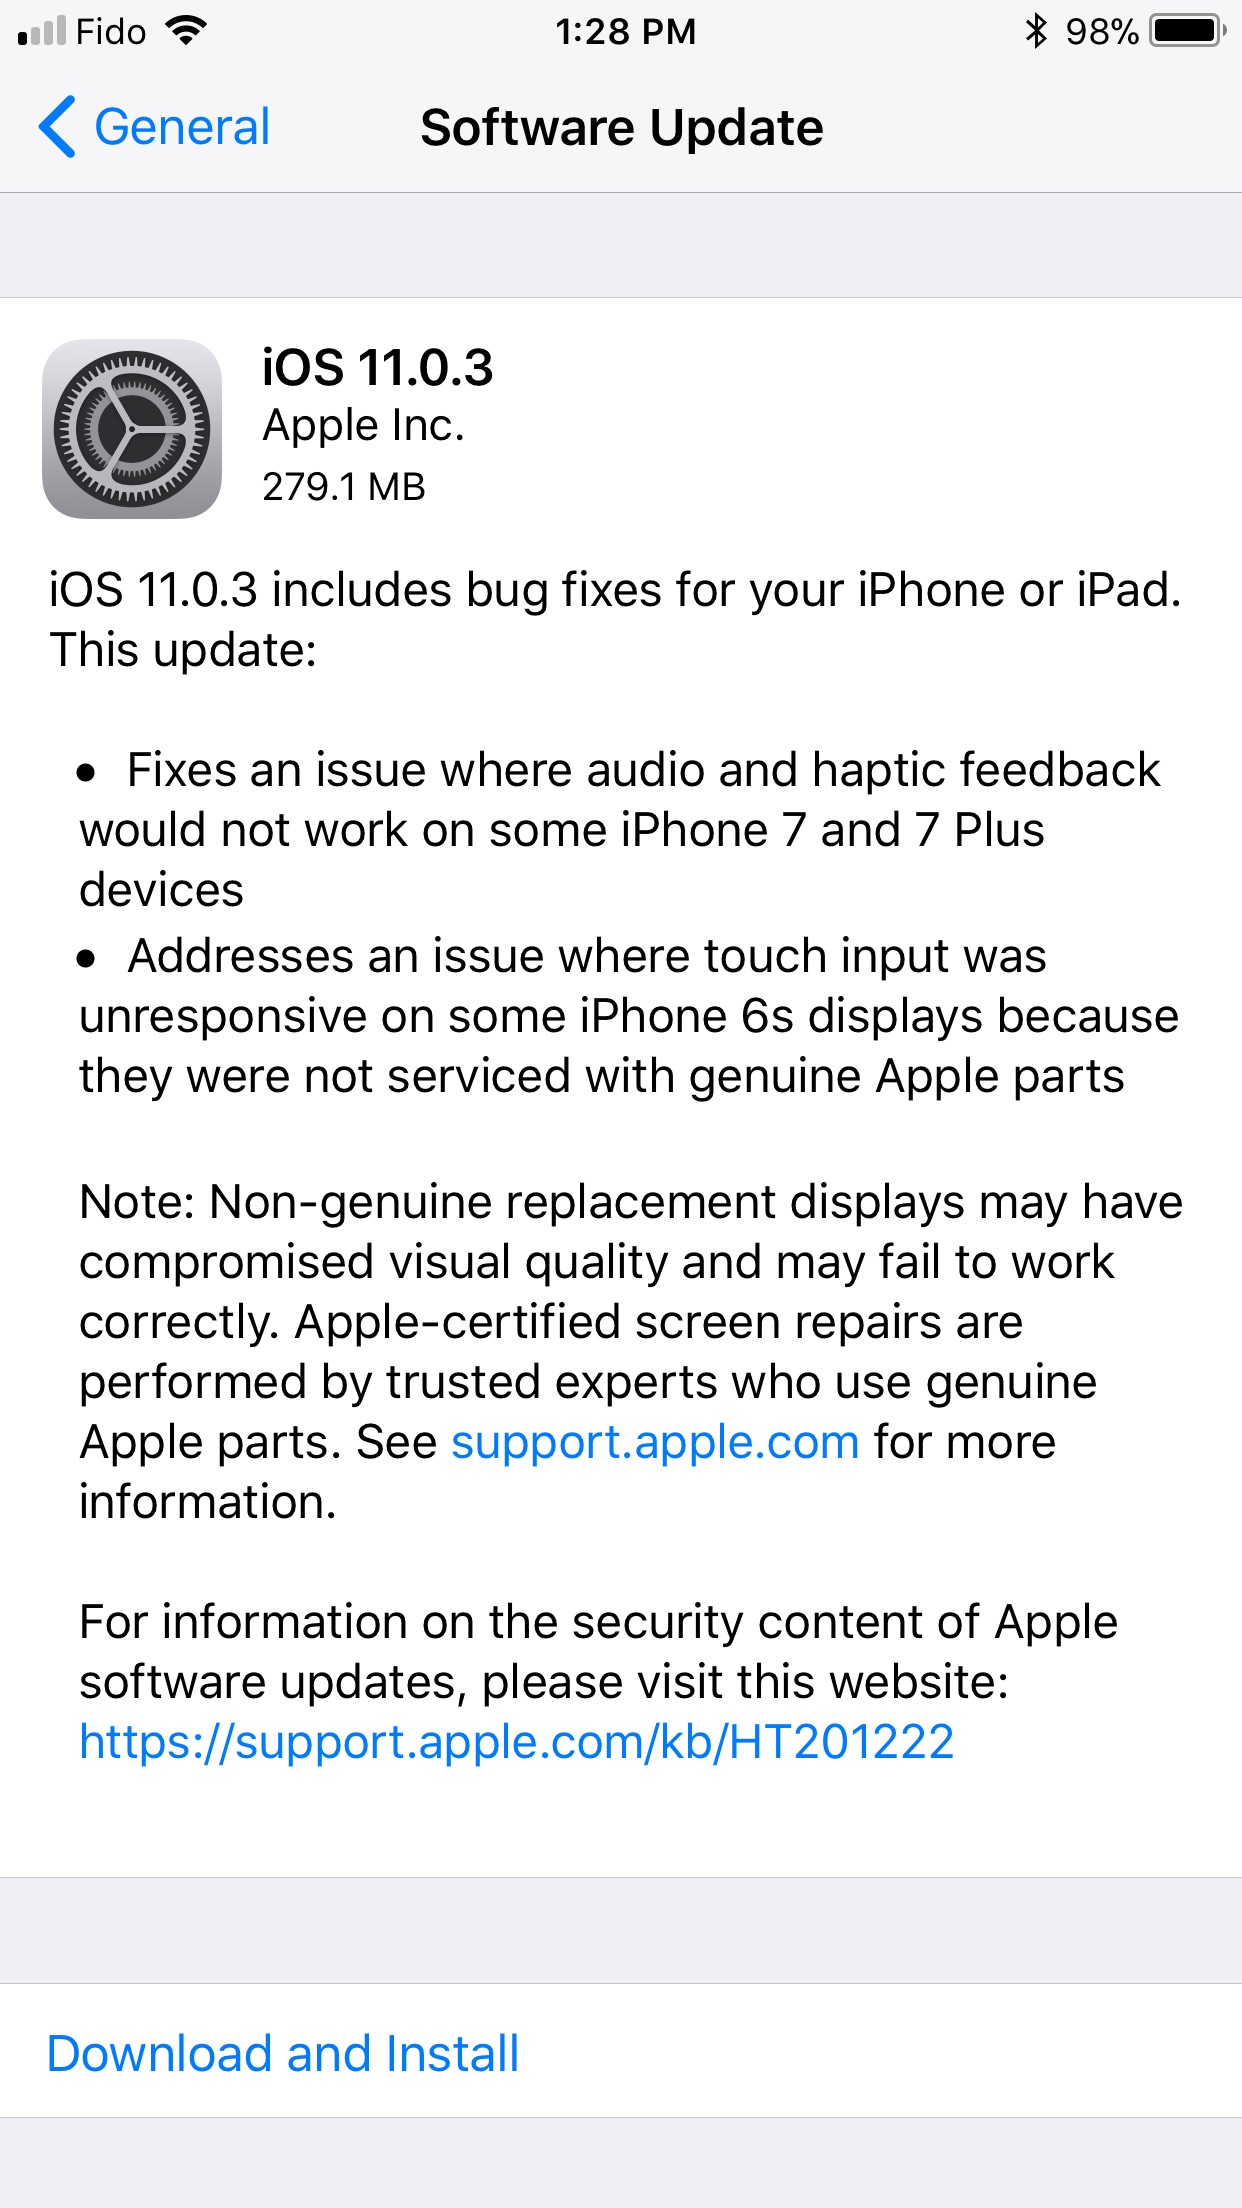 Apple Releases iOS 11.0.3 With Audio and Haptic Feedback Fix [Download]